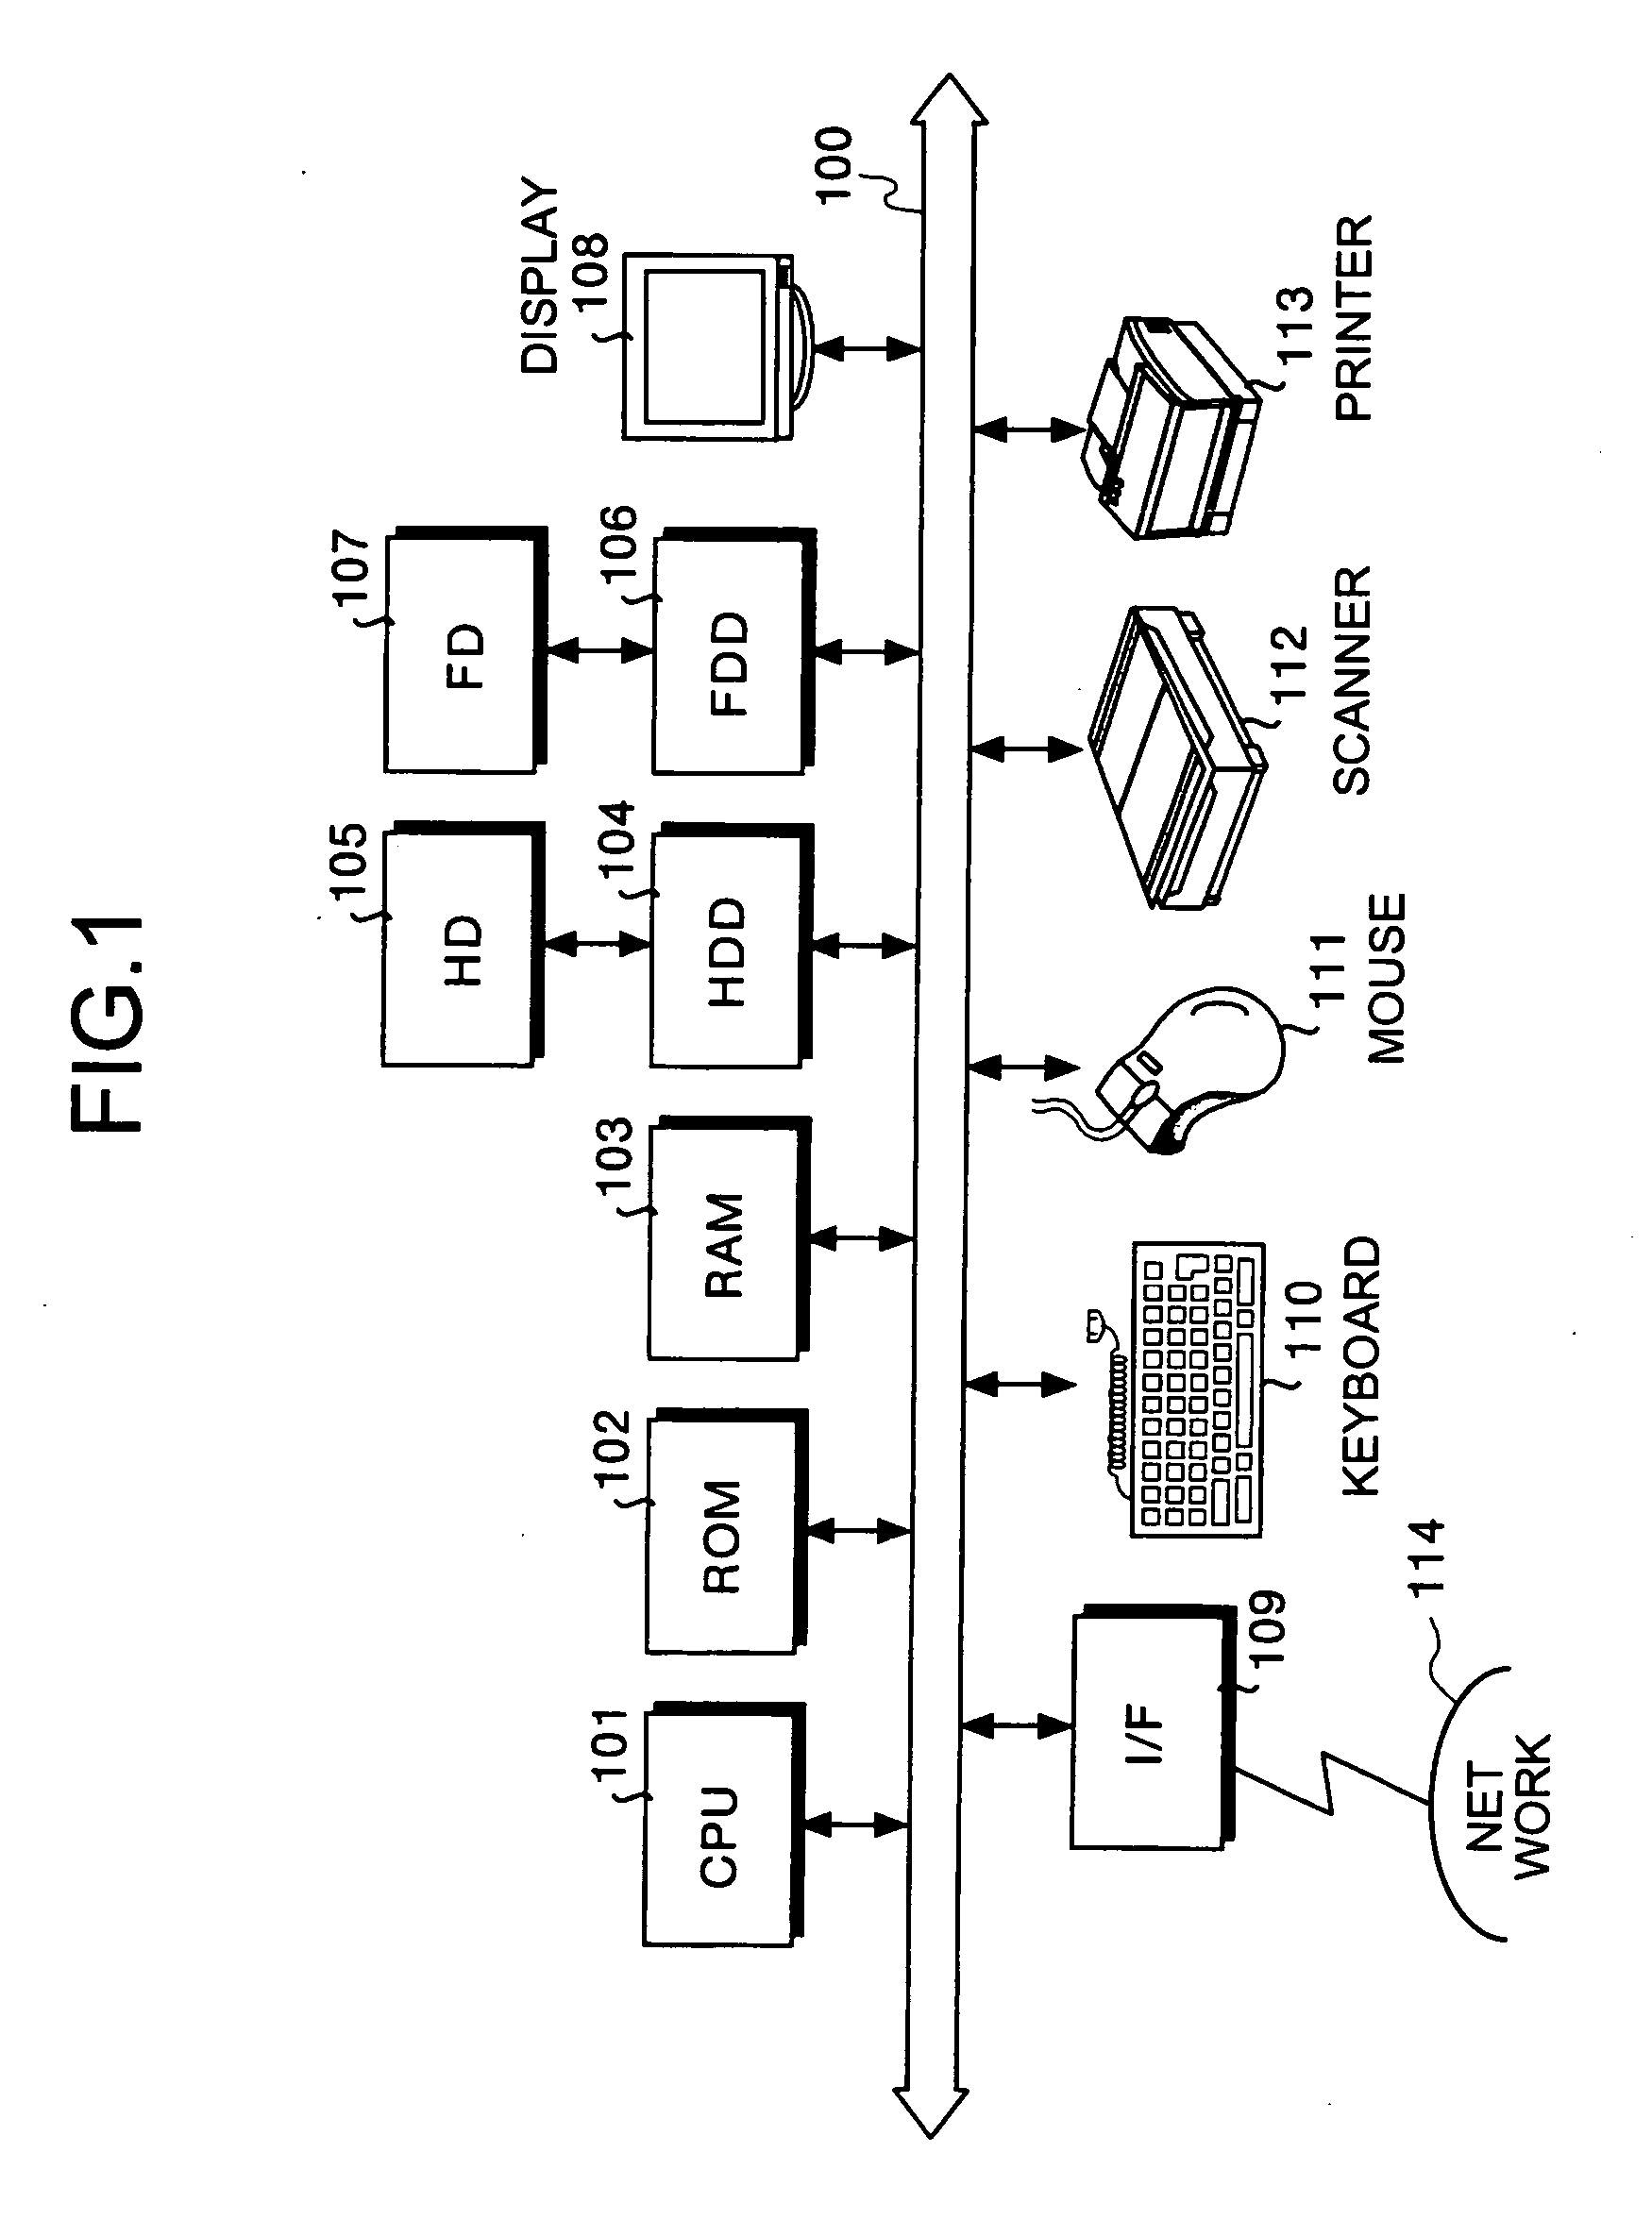 Design supporting apparatus, design supporting method, and computer product